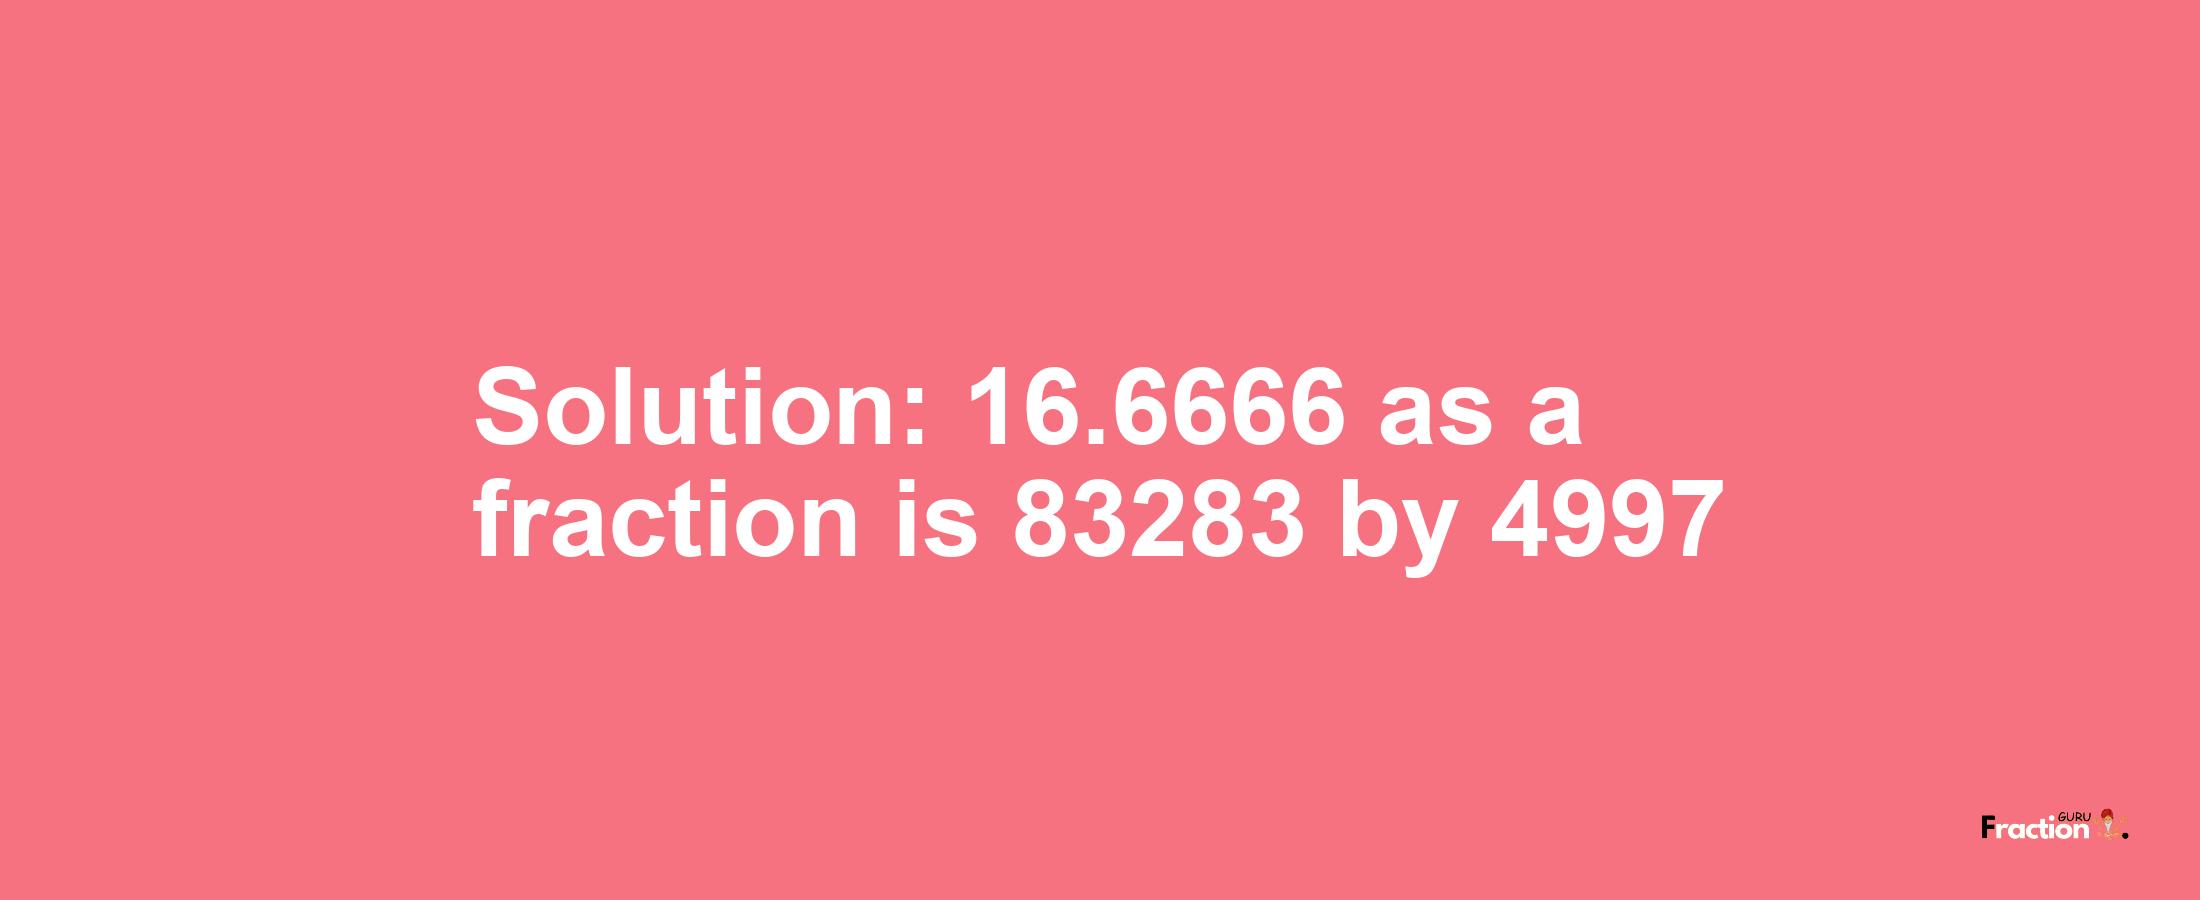 Solution:16.6666 as a fraction is 83283/4997